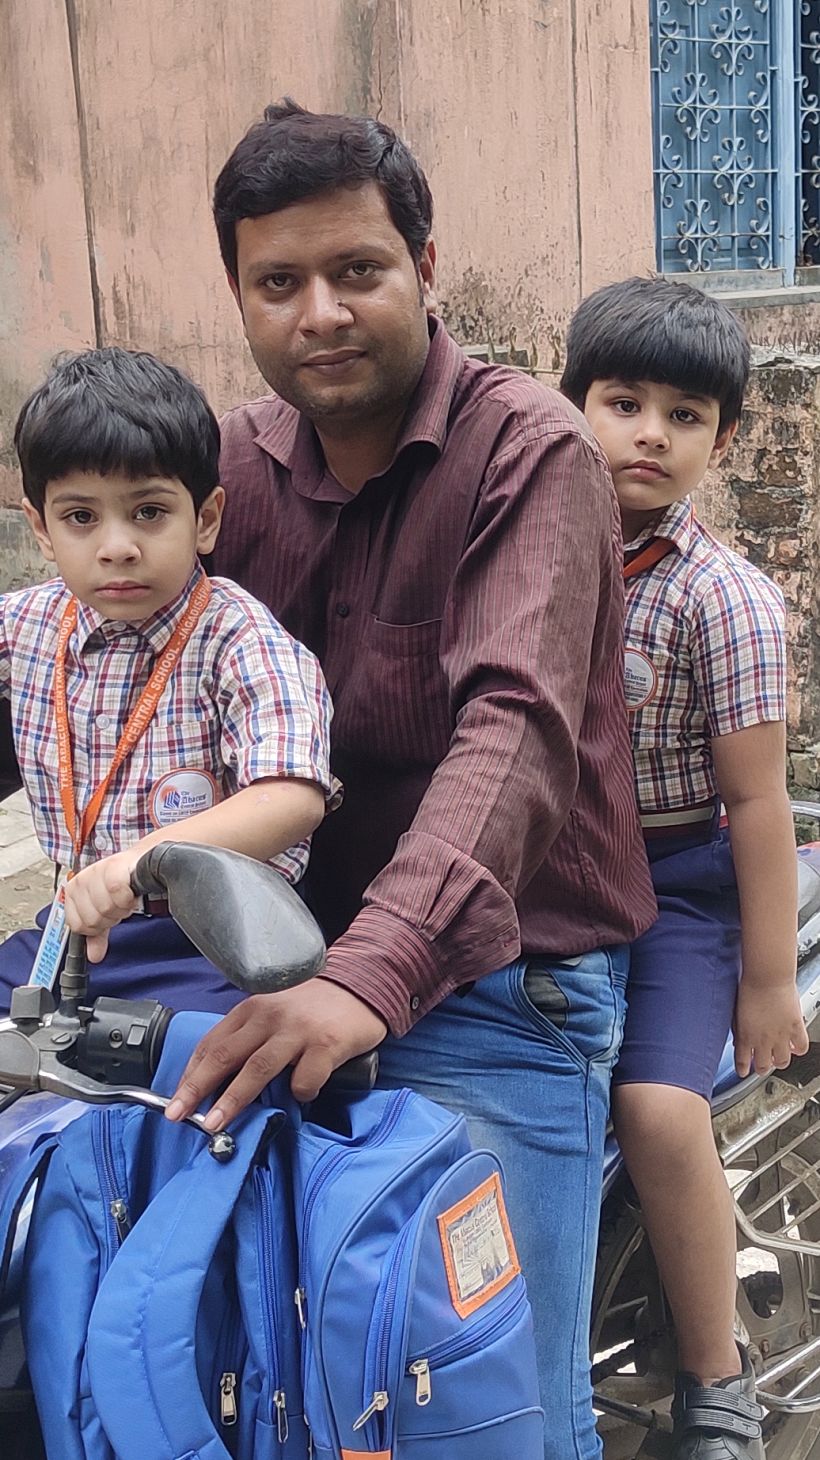 A photo of Arijit Khan with his two children, one in front and one behind him on a motorcycle.